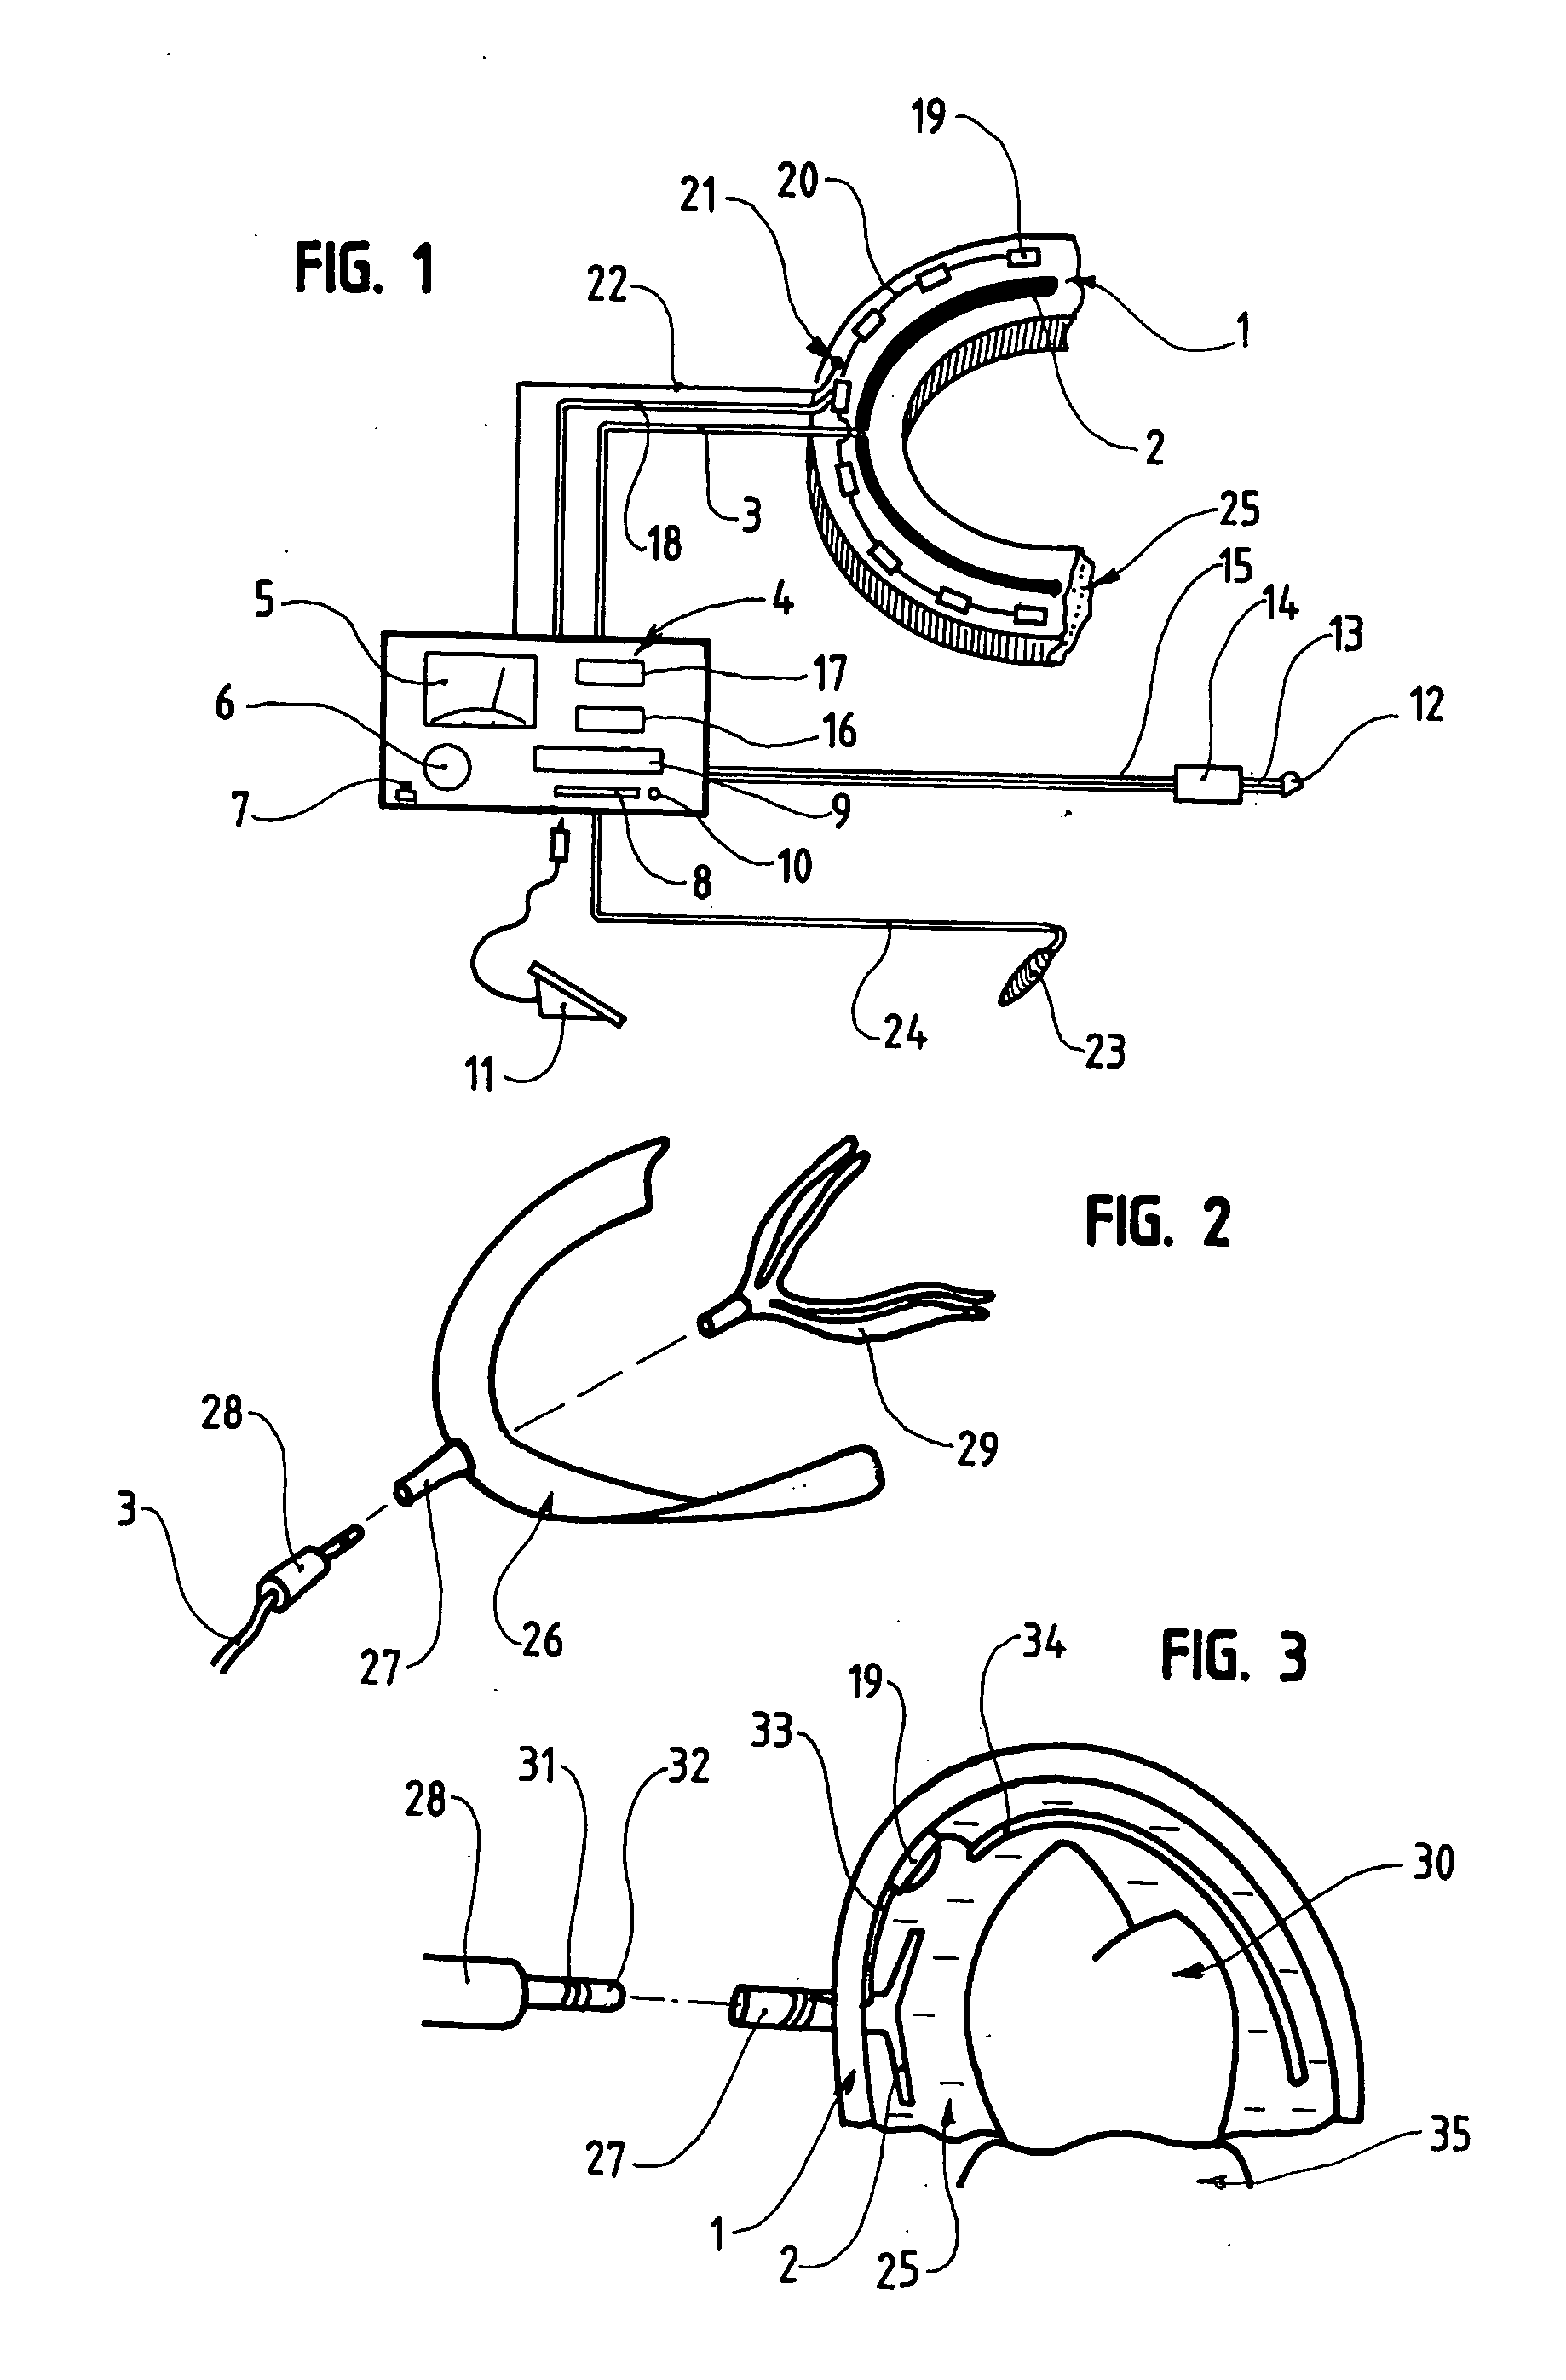 Bleaching device using electro-optical and chemical means namely in the medical and dental field